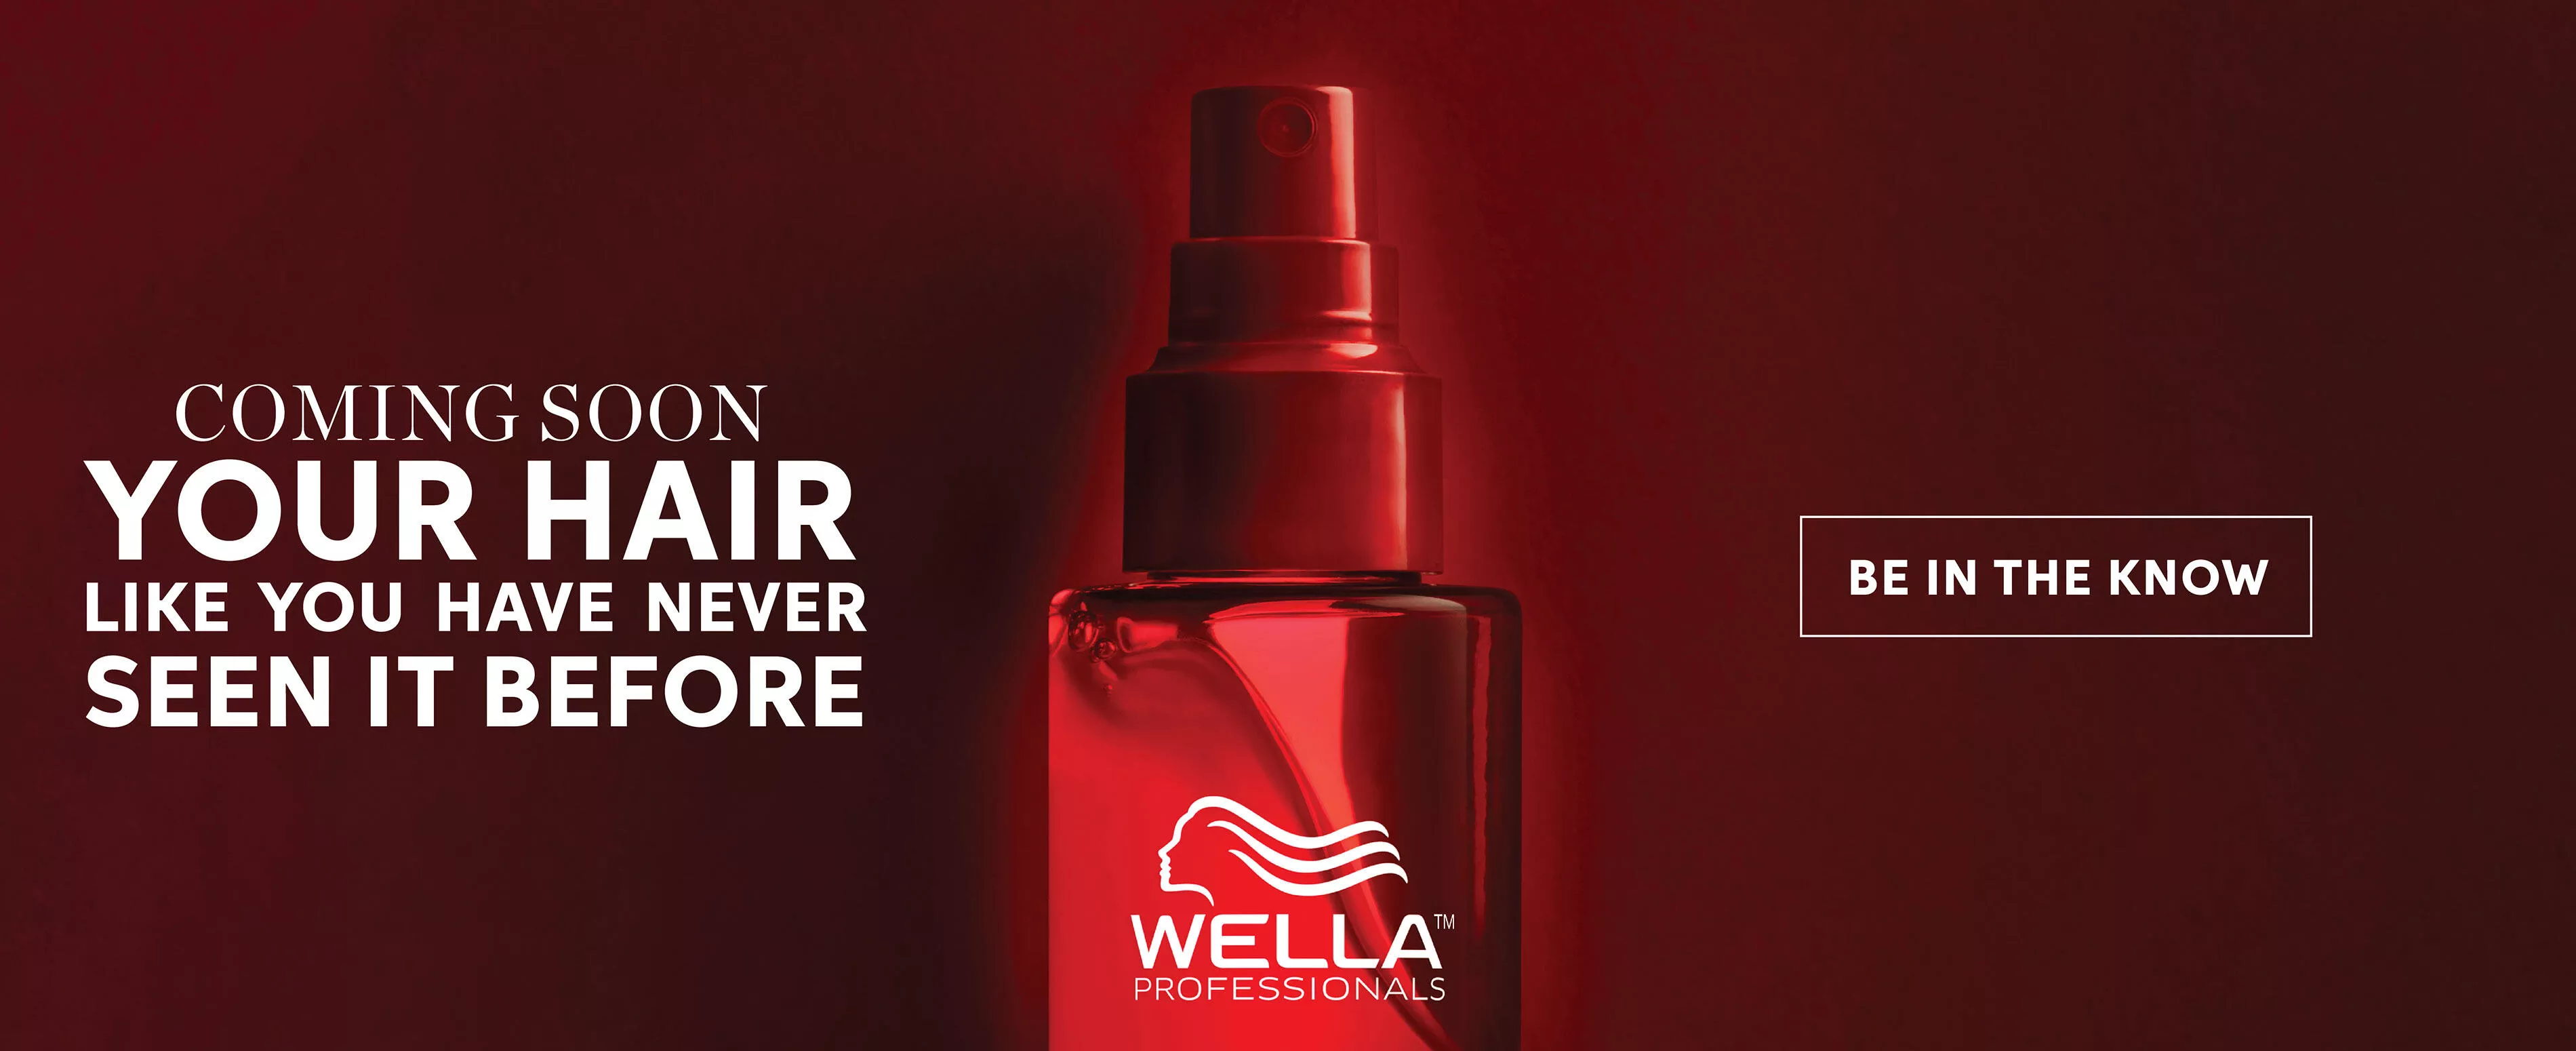 The spray nozzle of a Wella Professionals Ultimate Repair product next to a 'Coming Soon' banner